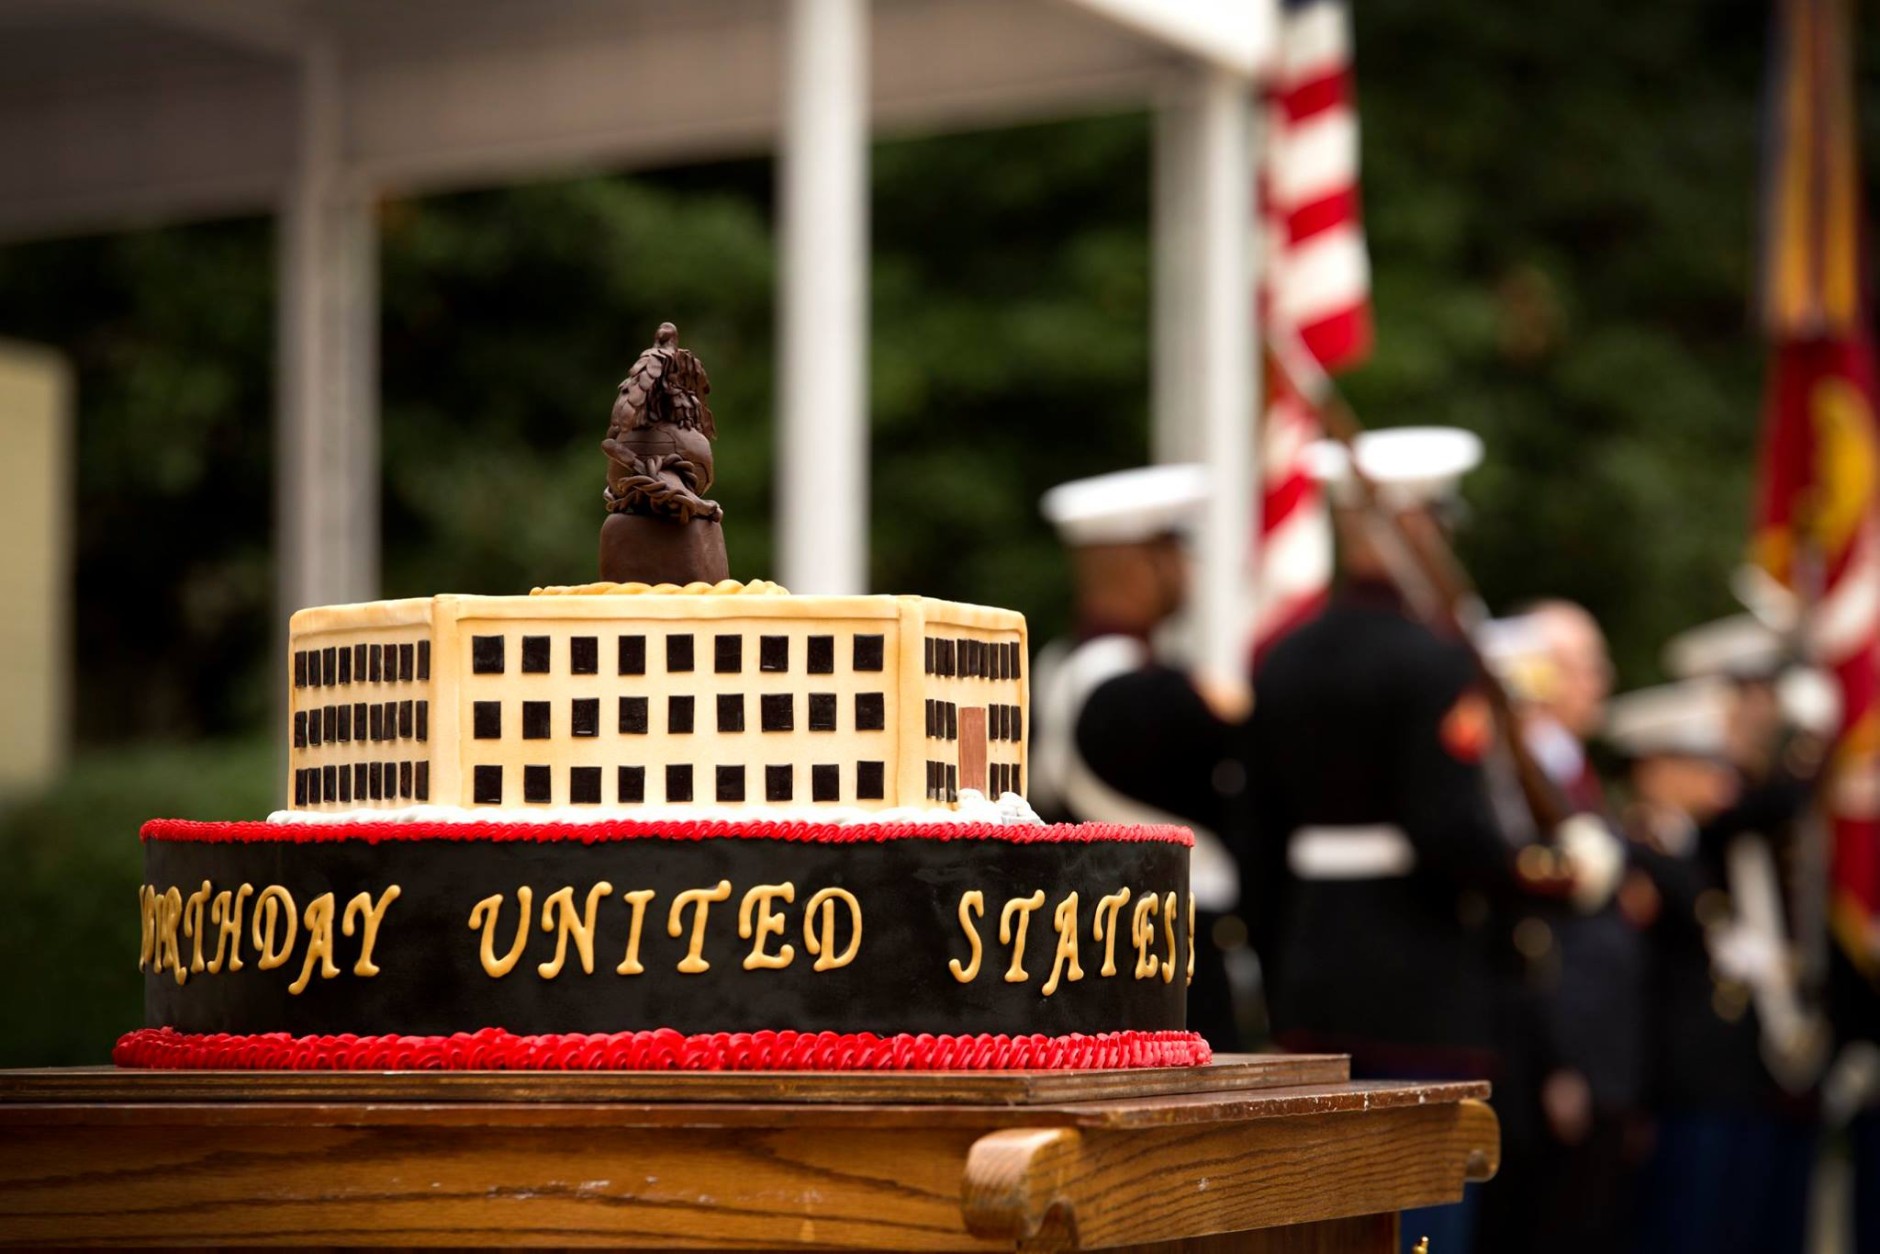 The birthday cake is set aside as the cake cutting ceremony concludes Nov. 9 at the Pentagon. (U.S. Marine Corps photo by Sgt. Lena Wakayama/Released) 